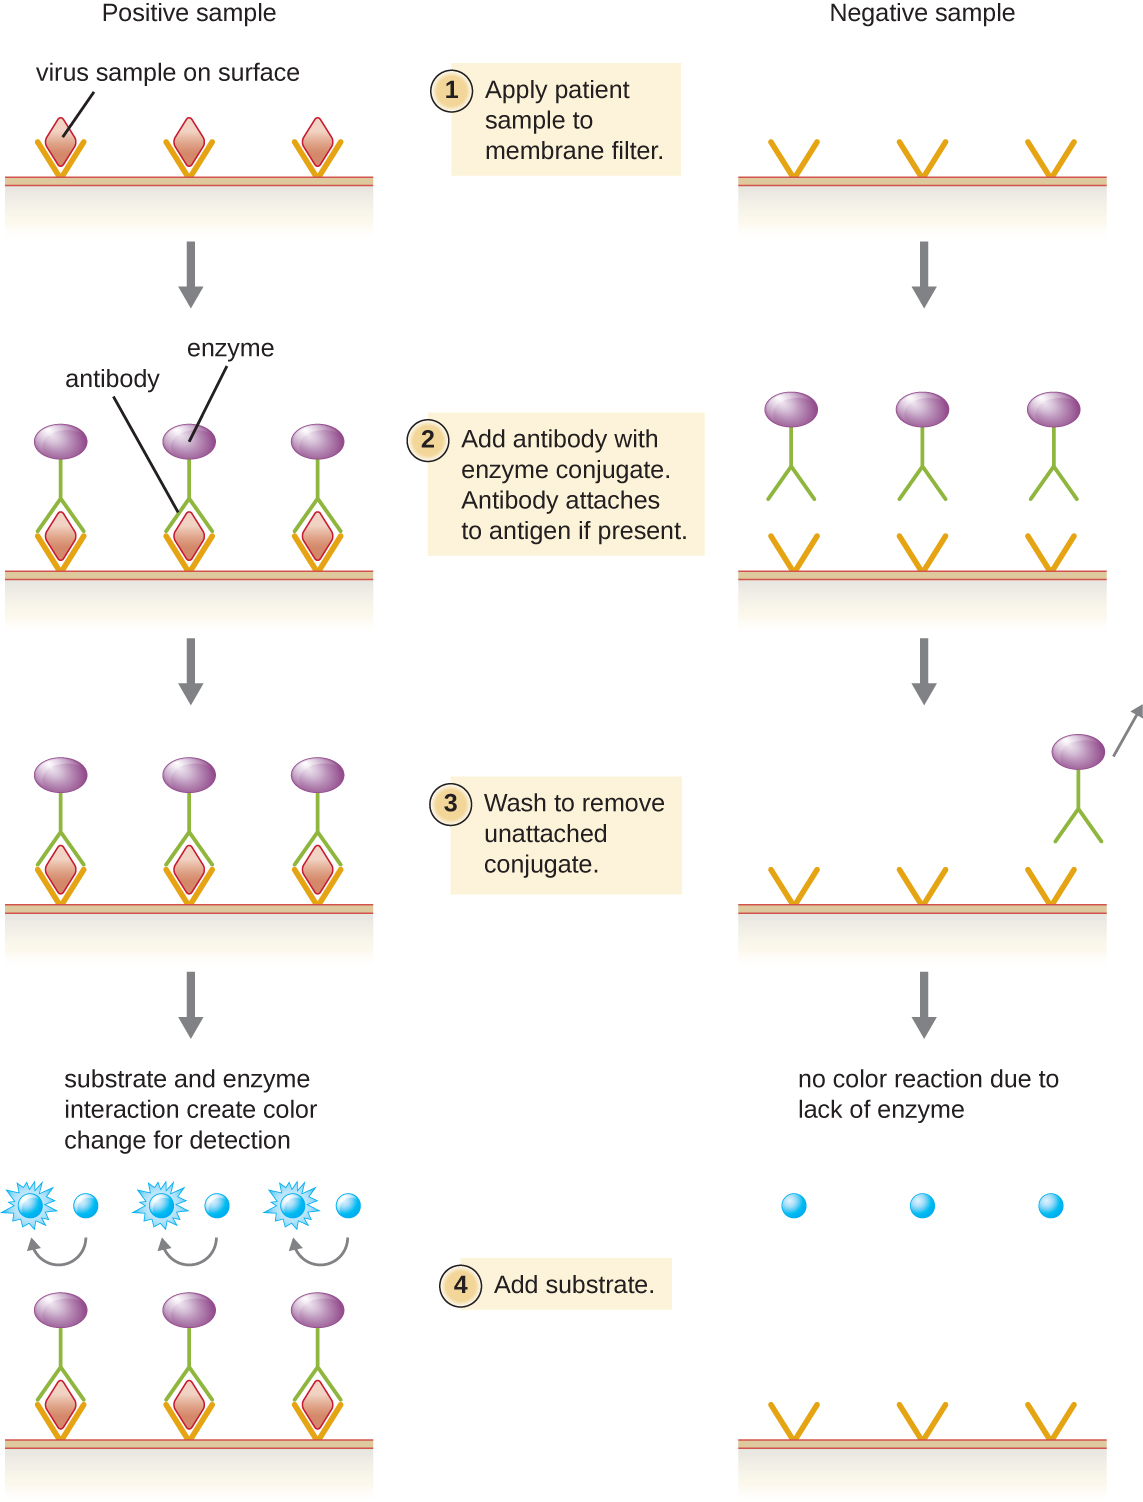 The explanation of EIA is separated to show what occurs in a positive sample and what occurs in a negative sample. First patient sample is applied to a membrane filter. If the sample contains viruses they are trapped by the filter. Next, antibody with enzyme conjugate is added. Antibody will attach to antigen if present. Next is a wash step. If the virus is present the enzyme binds to the virus, otherwise the enzyme washes away. Finally substrate is added. If the antibody is present (because it is bound to the virus) the attached enzyme causes a color change. If no enzyme linked antibody is present, no color change occurs.